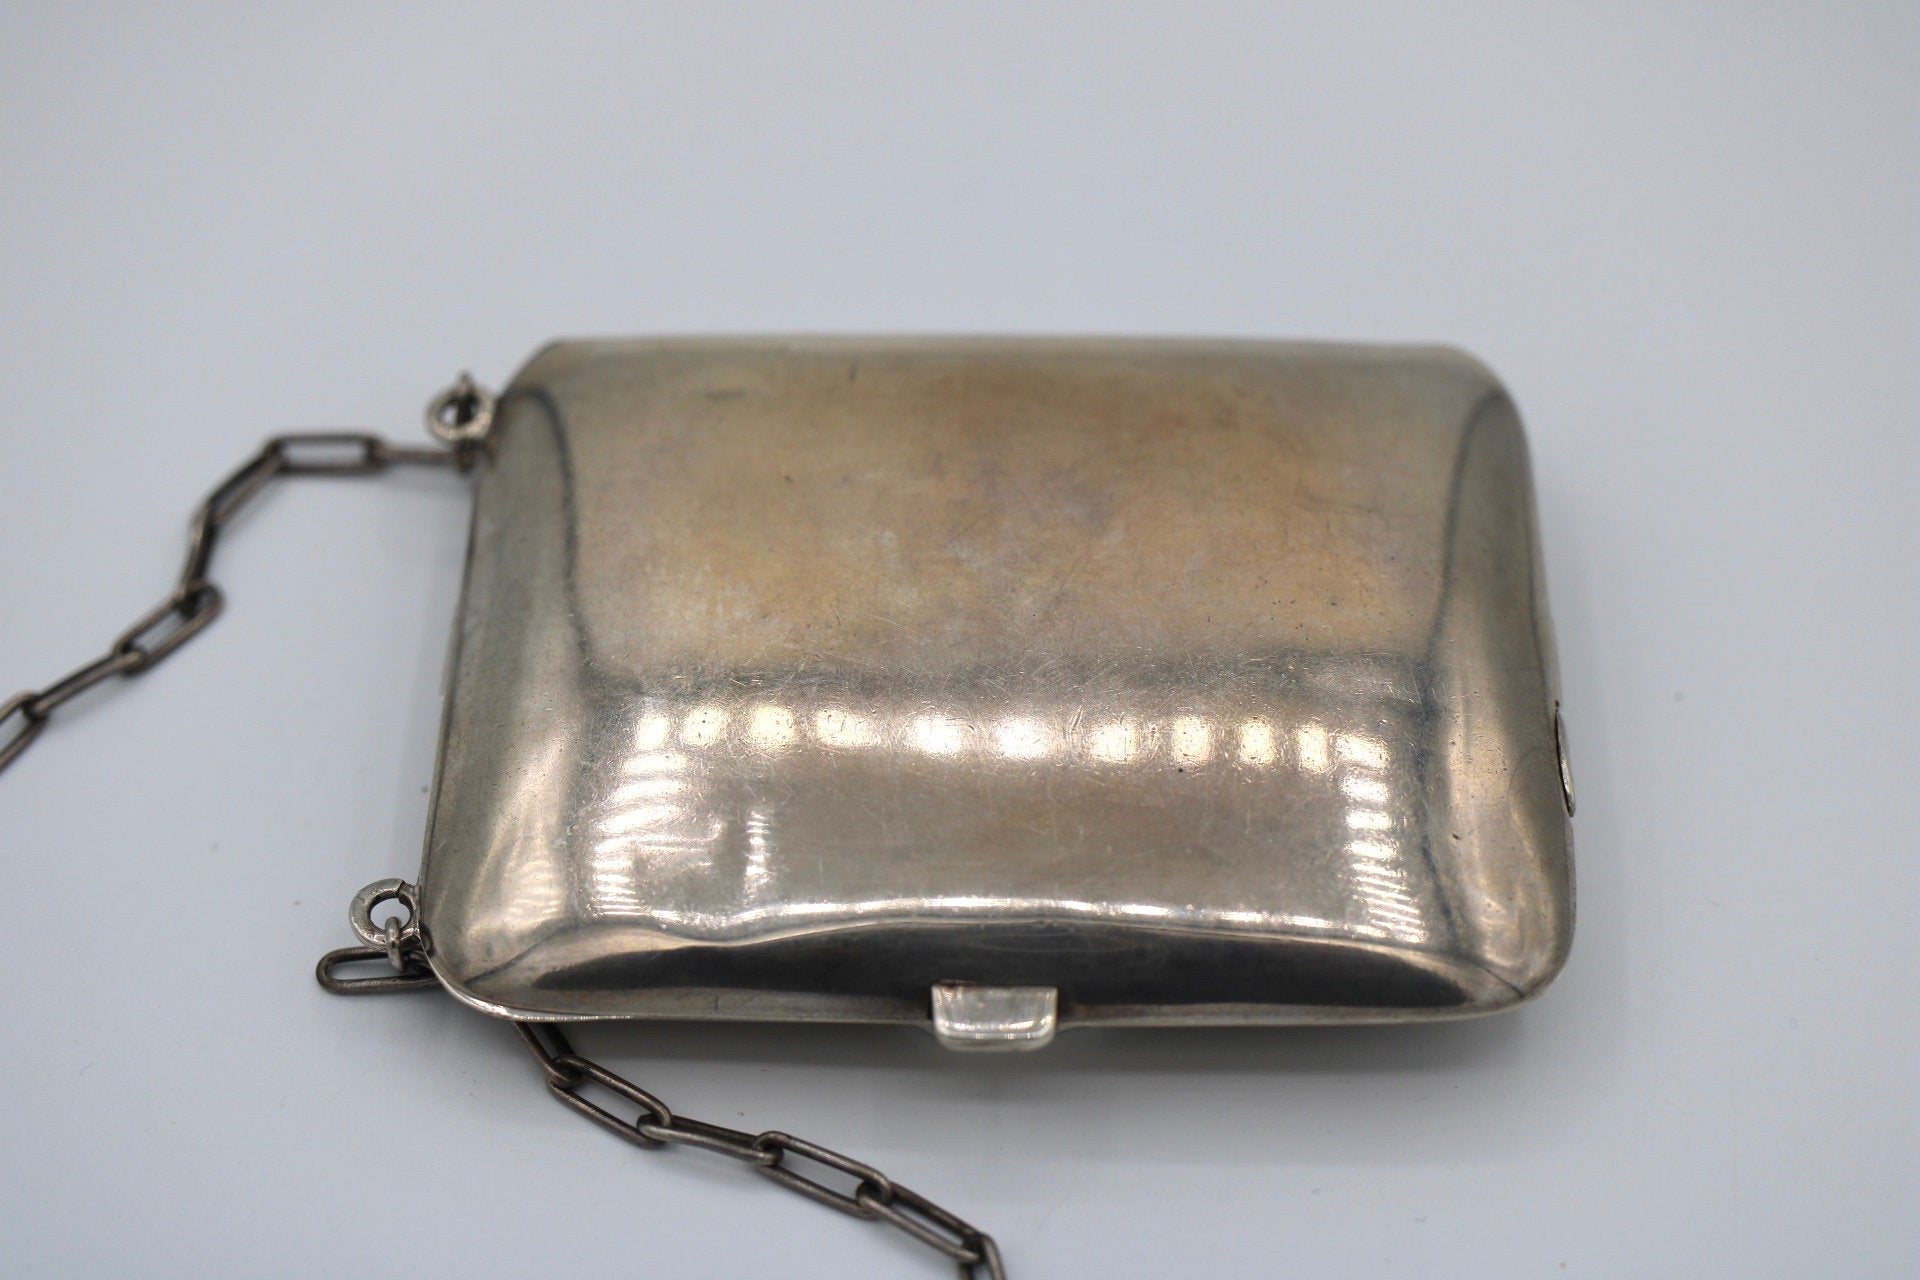 Sold at Auction: STERLING SILVER MONEY PURSE W/RARE COINS